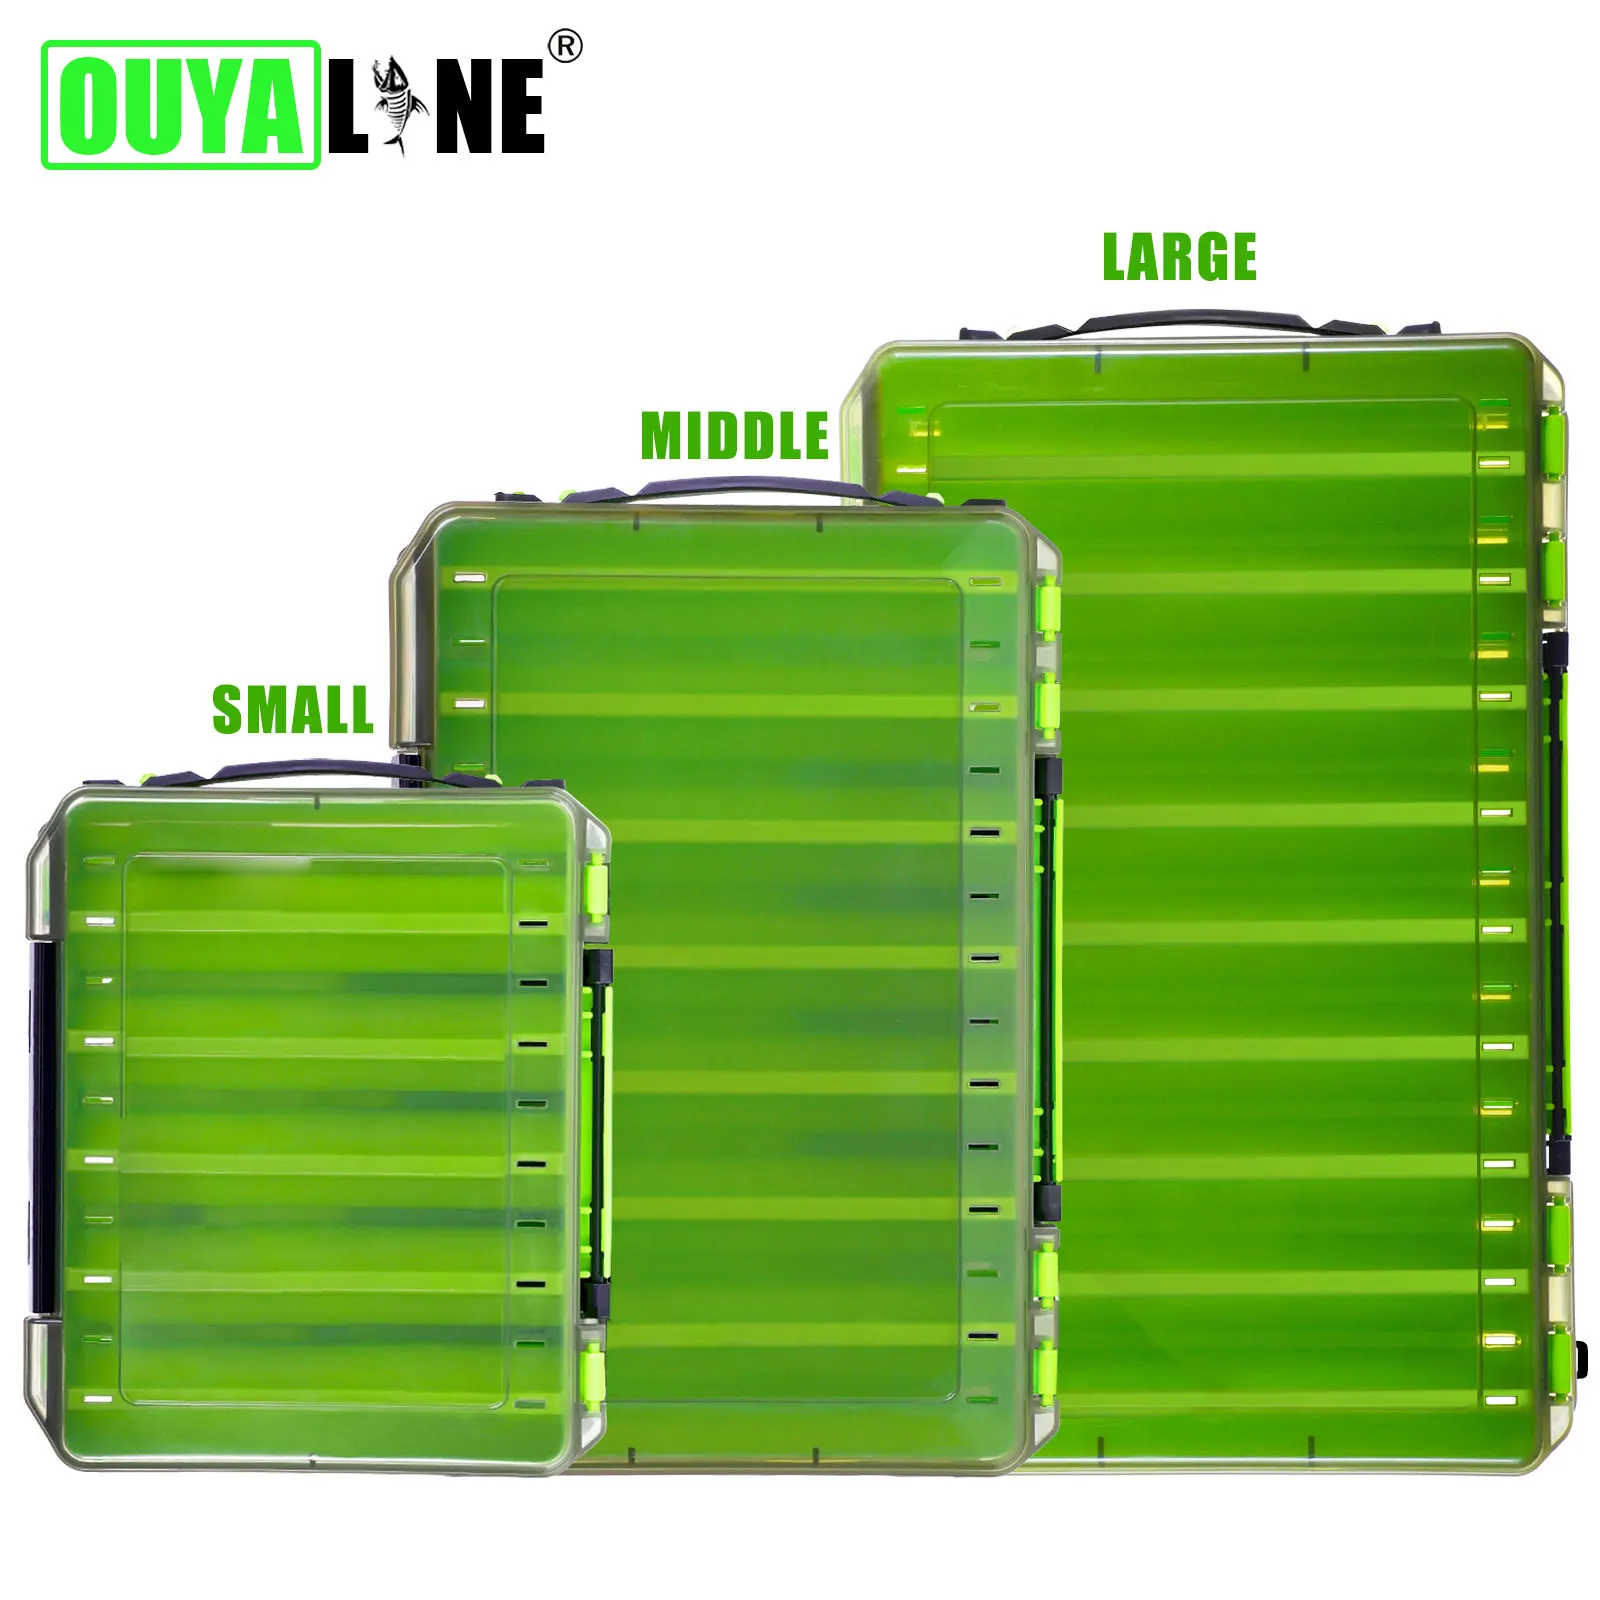 

New Double Sided Fishing Tackle Box Baits Compartments Fishing Accessories Lure Hook Storage Container Case Adjustable Organizer